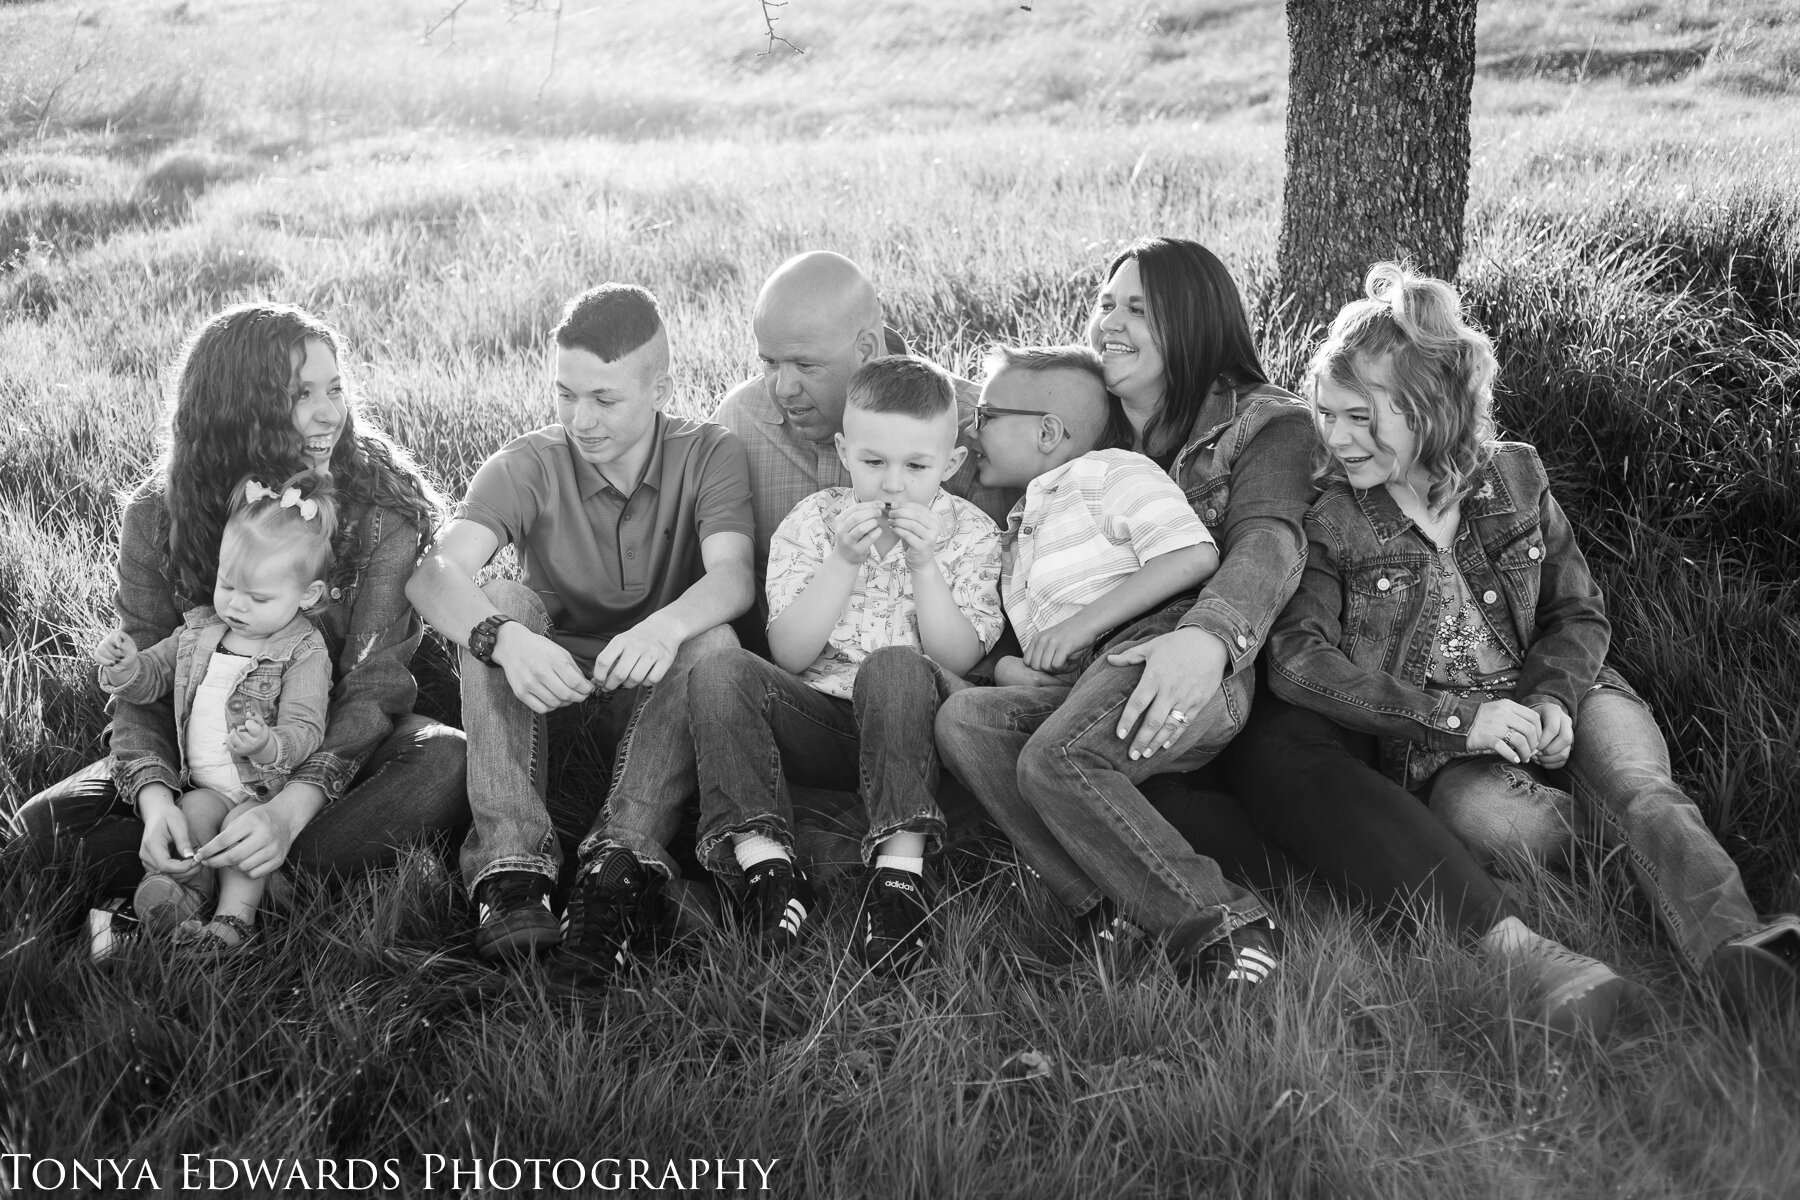 Tonya Edwards | Oroville CA Family Photographer | natural family session